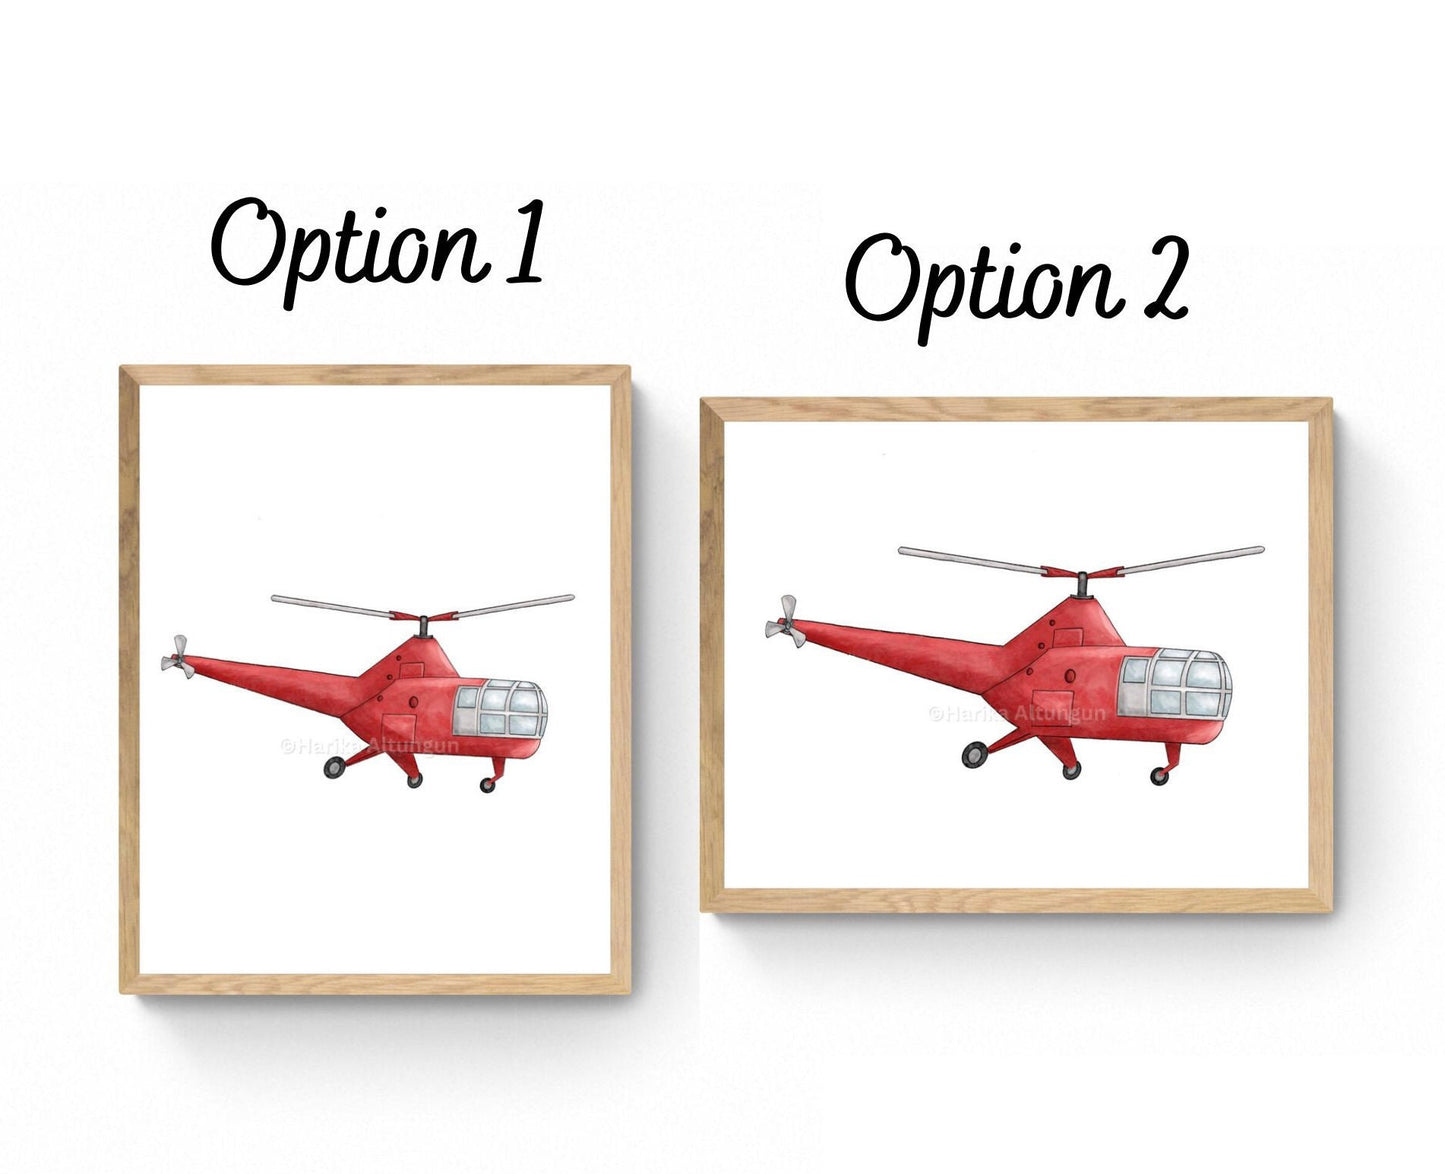 Vintage Helicopter Wall Art, Kids Transportation Print, Red Helicopter Painting, Playroom and Nursery Art, Adventure Print, Boys Room Gift